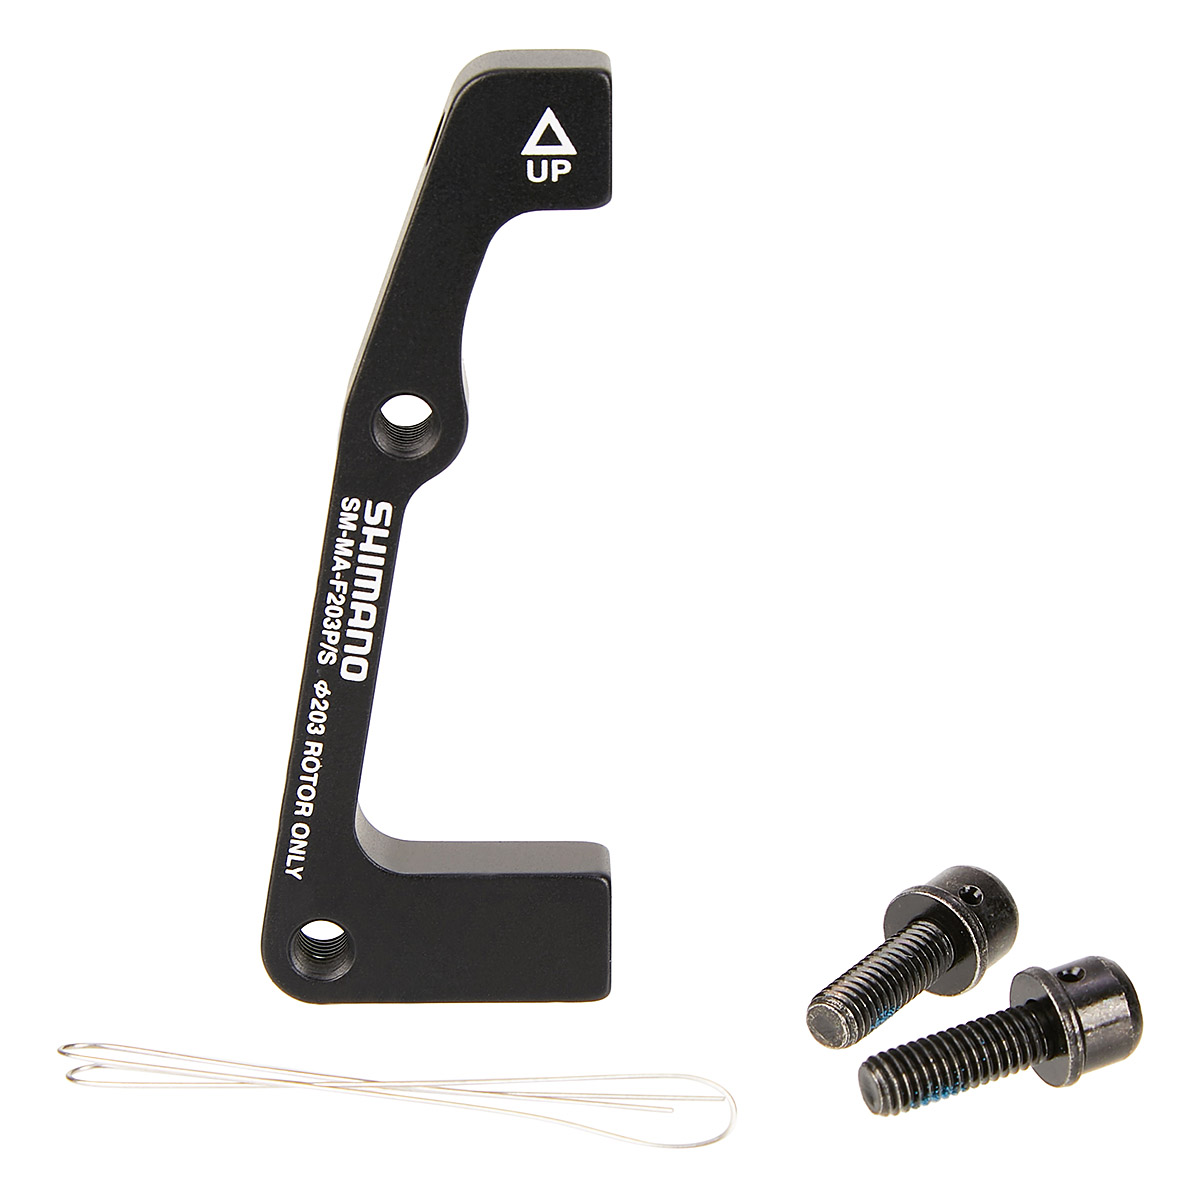 Shimano Adaptateur  for PM-Brake/IS-Fork, for 203mm, for BR-M 966,765,585